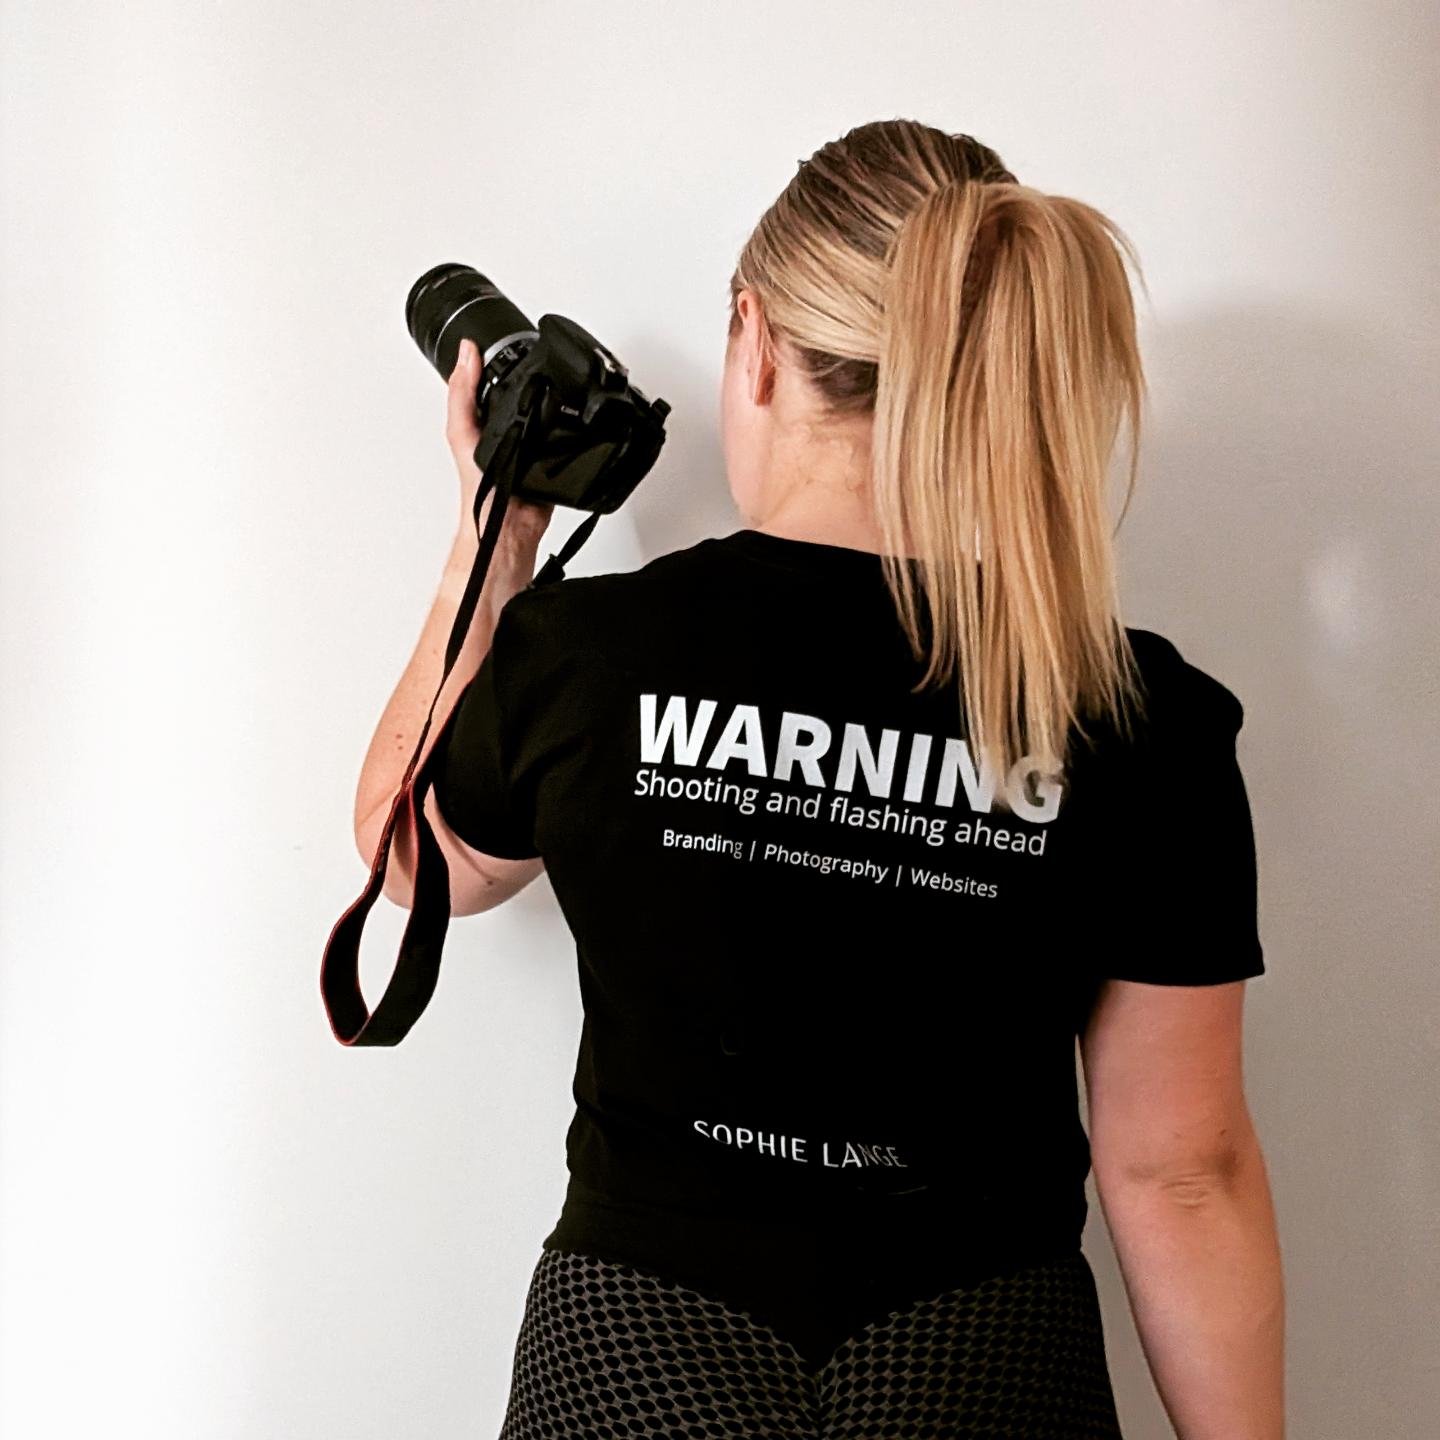 Warning: Shooting and flashing ahead. 😉 

I'm a photographer. Get in touch and book me today. 📸 💥

#SophieLange #creativedesigner #photographer #branddesigner #graphicdesigner #webdesigner #webdeveloper #photoshoot #canon #tedscameras #productphot